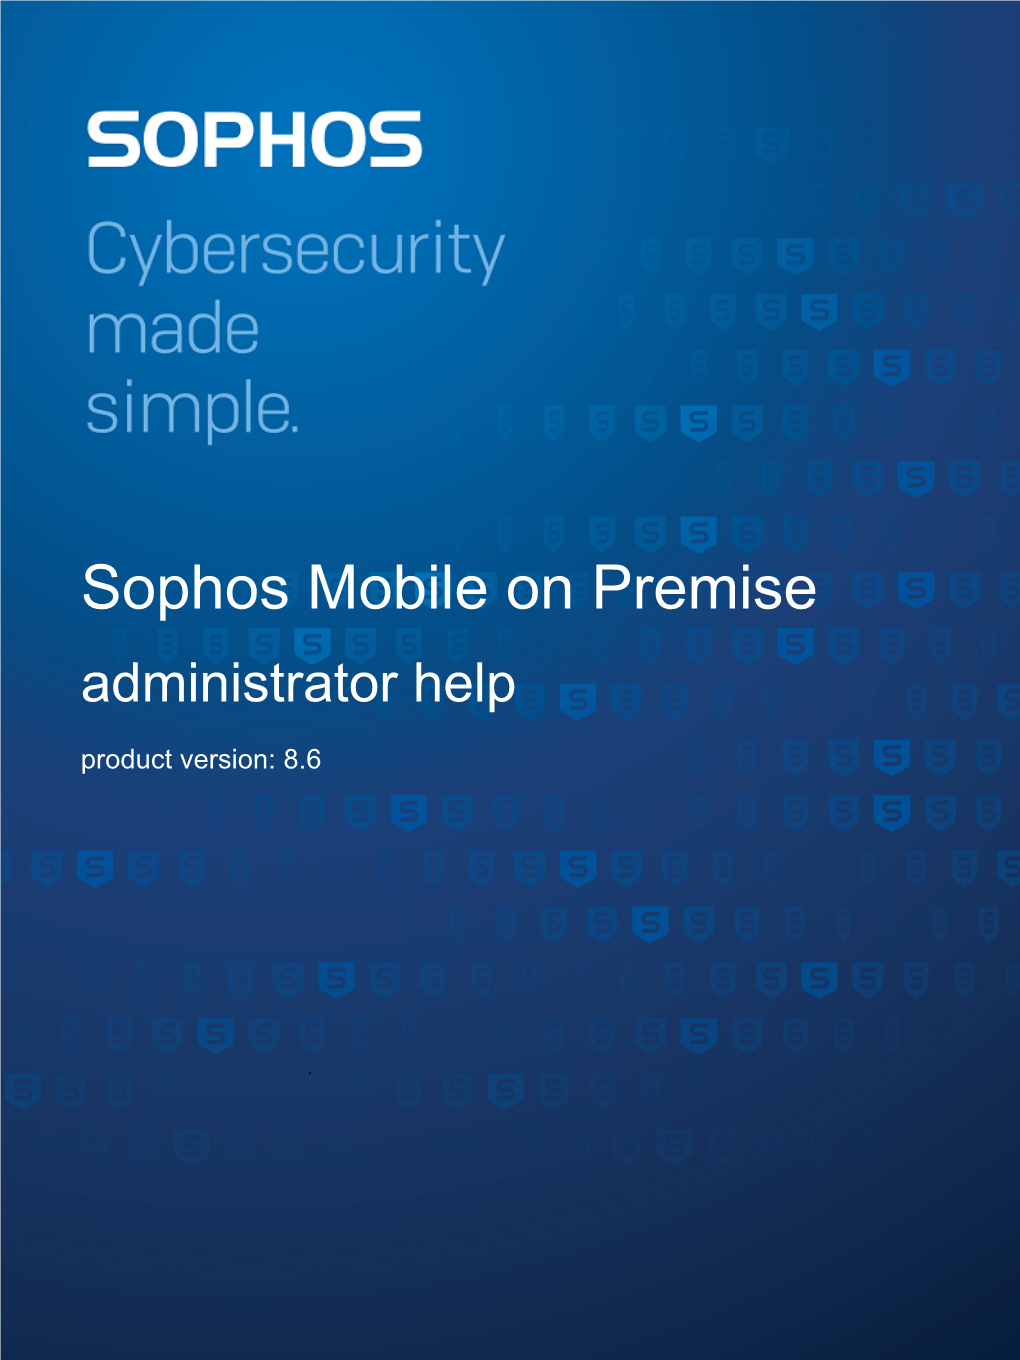 Sophos Mobile on Premise Administrator Help Product Version: 8.6 Contents About This Help